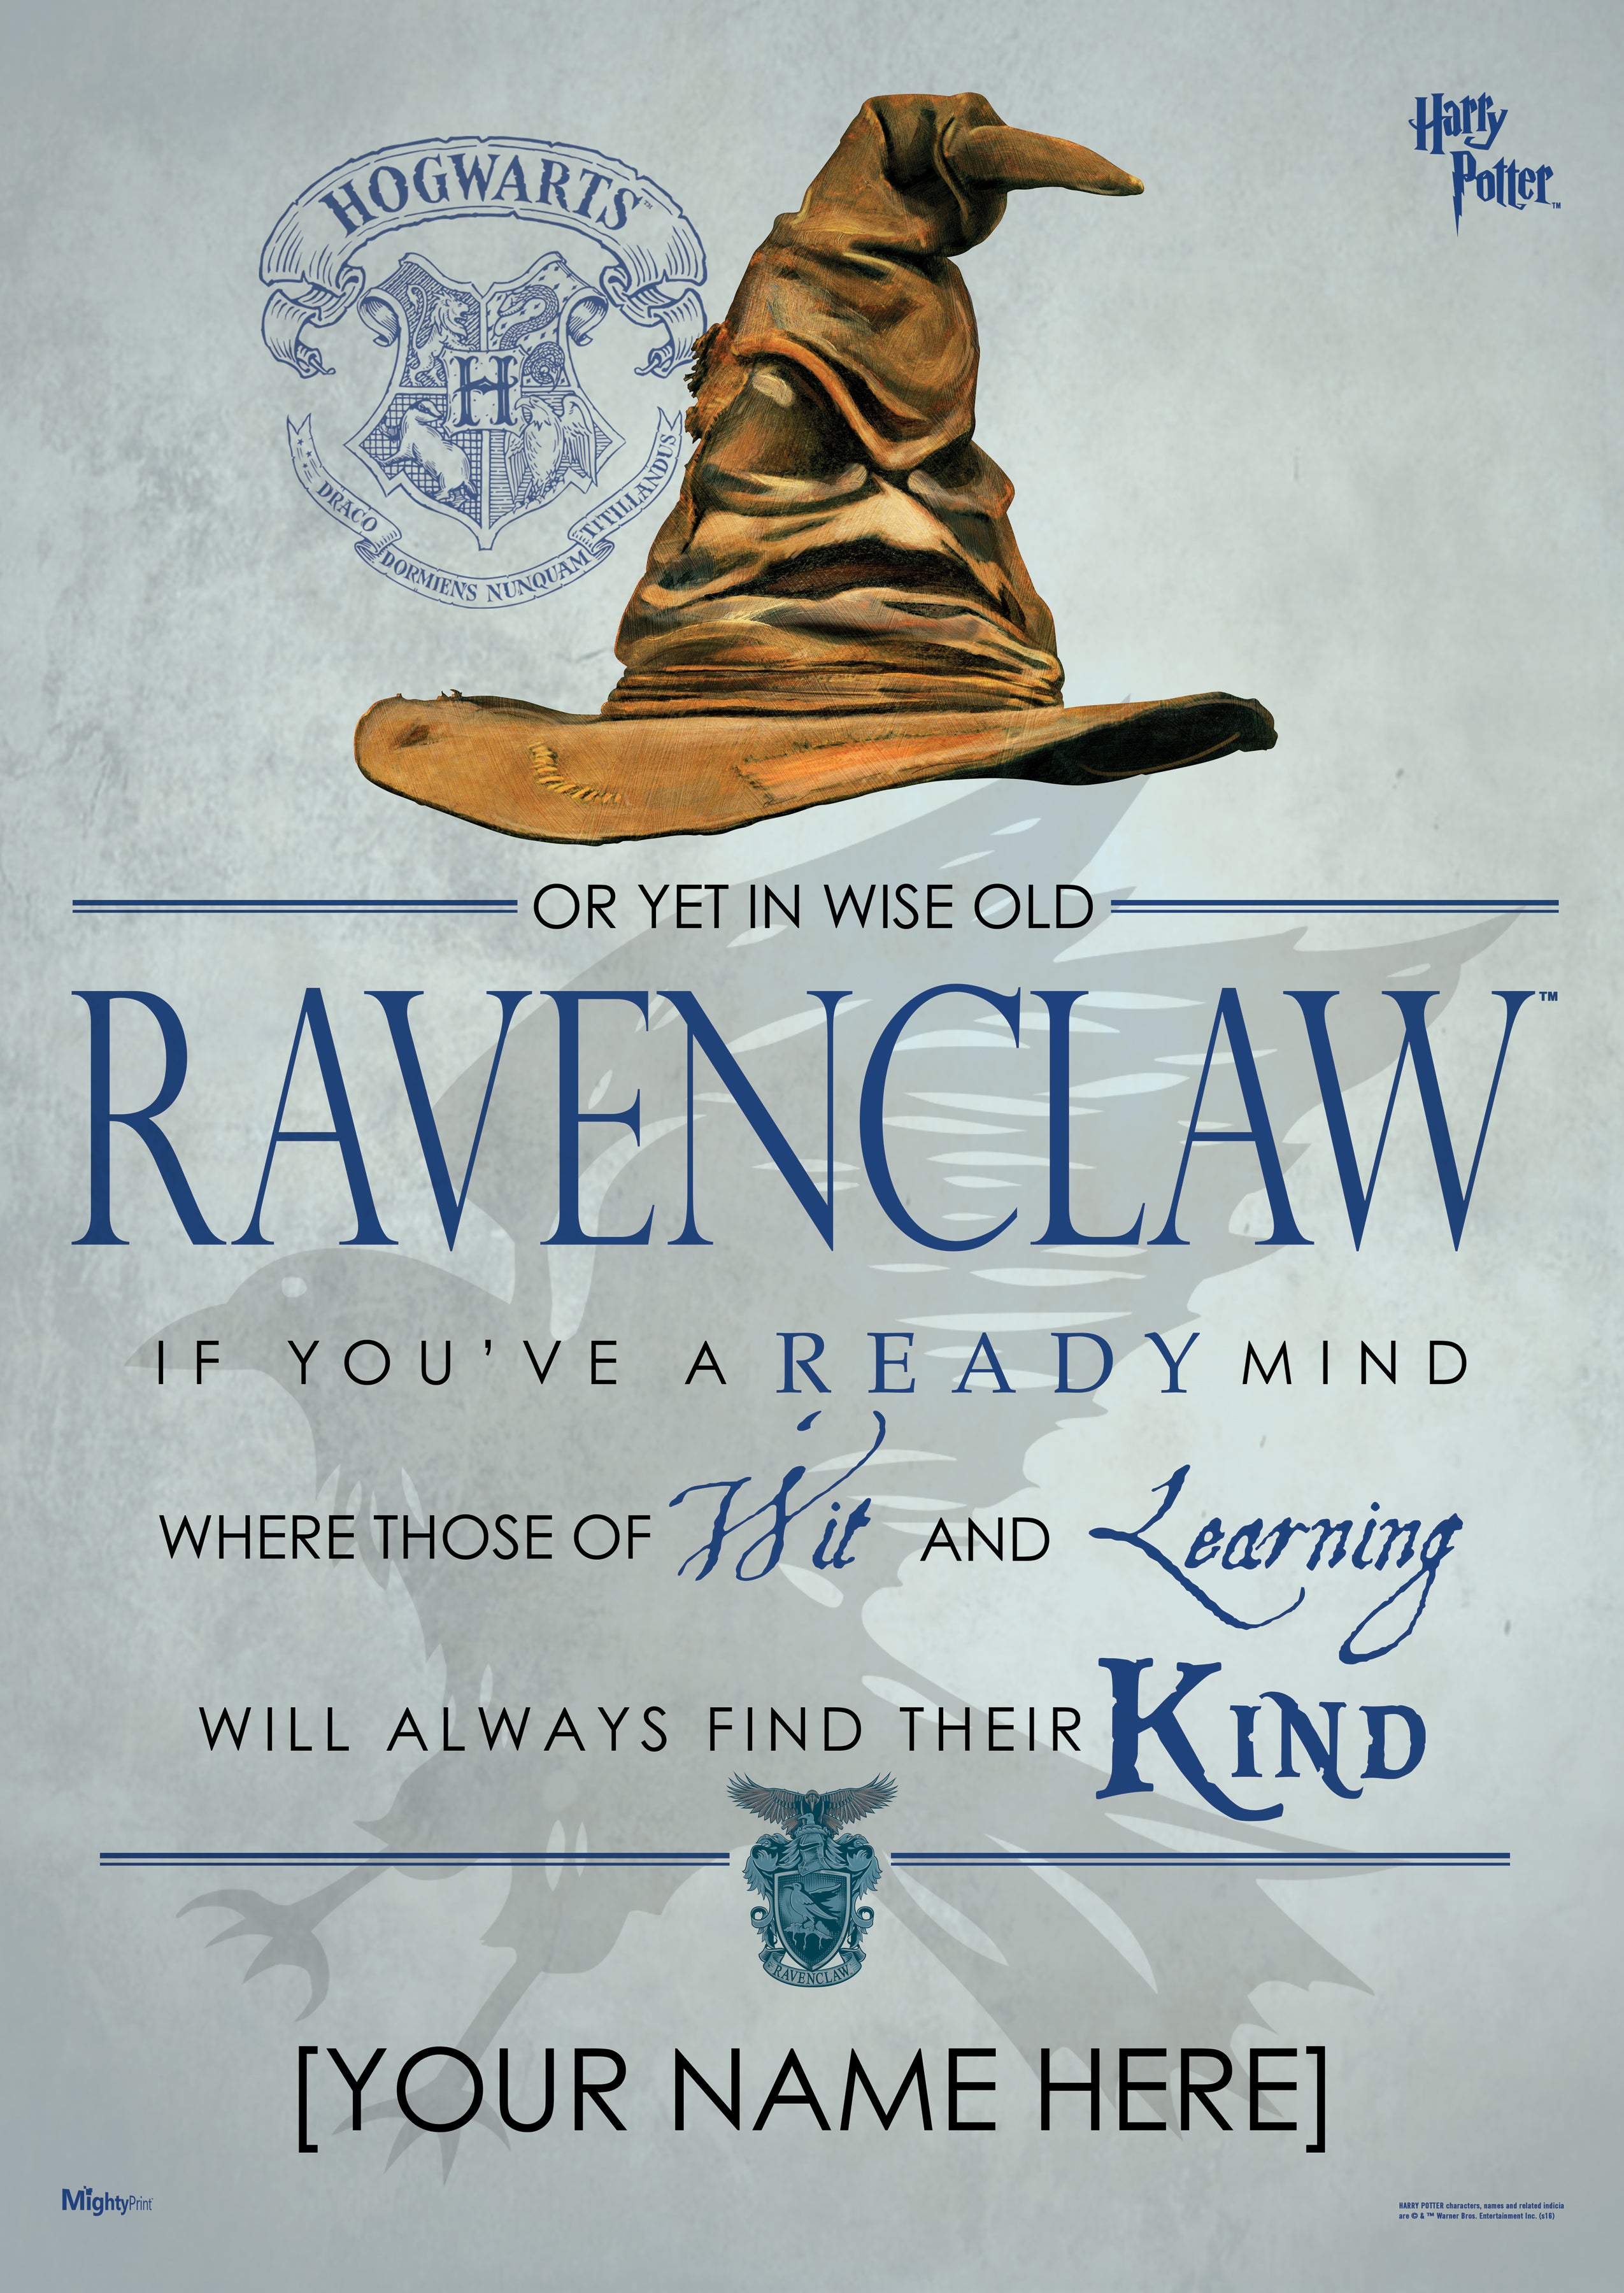 Harry Potter (Ravenclaw Sorting Hat Poem - Personalize with Name) MightyPrint Wall Art